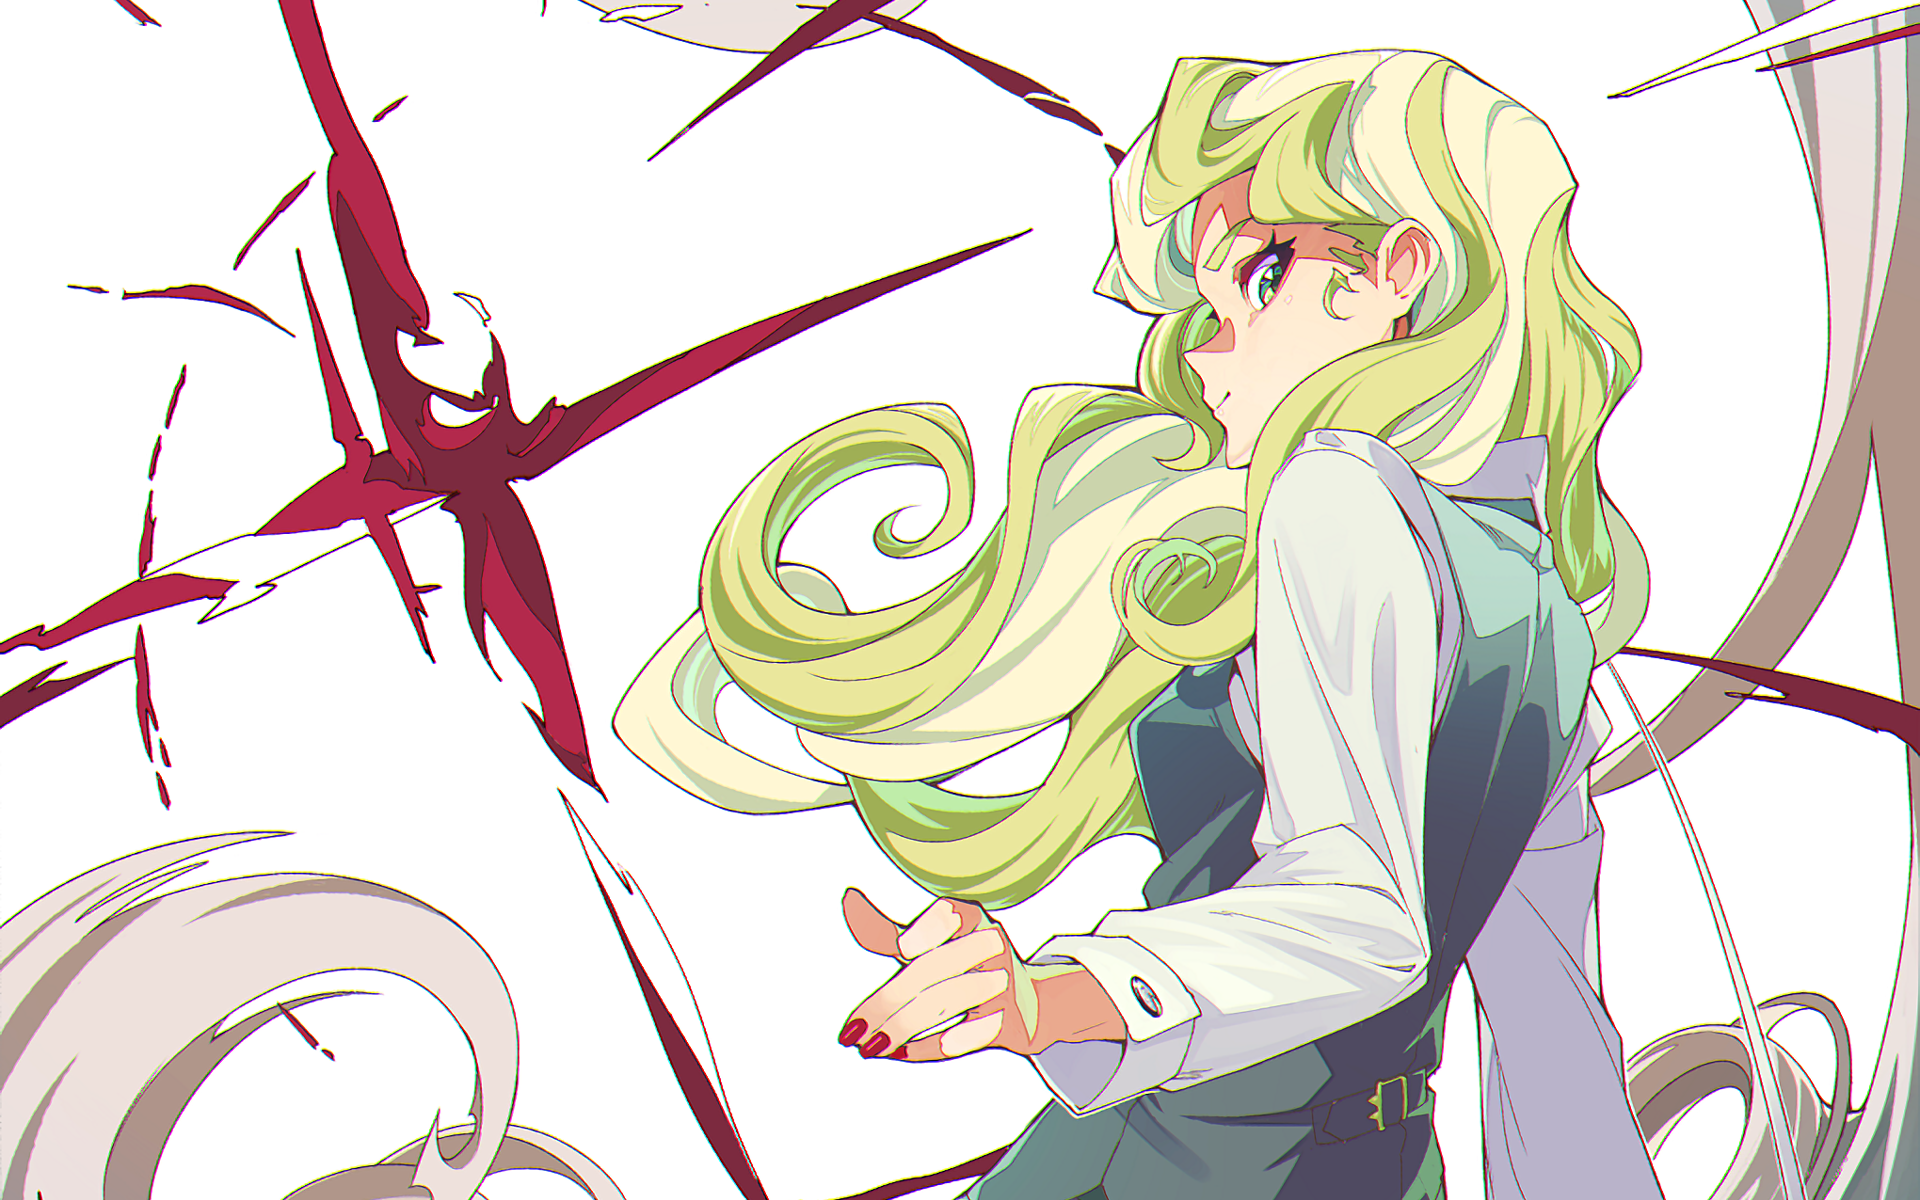 Little Witch Academia Diana Cavendish Wallpapers